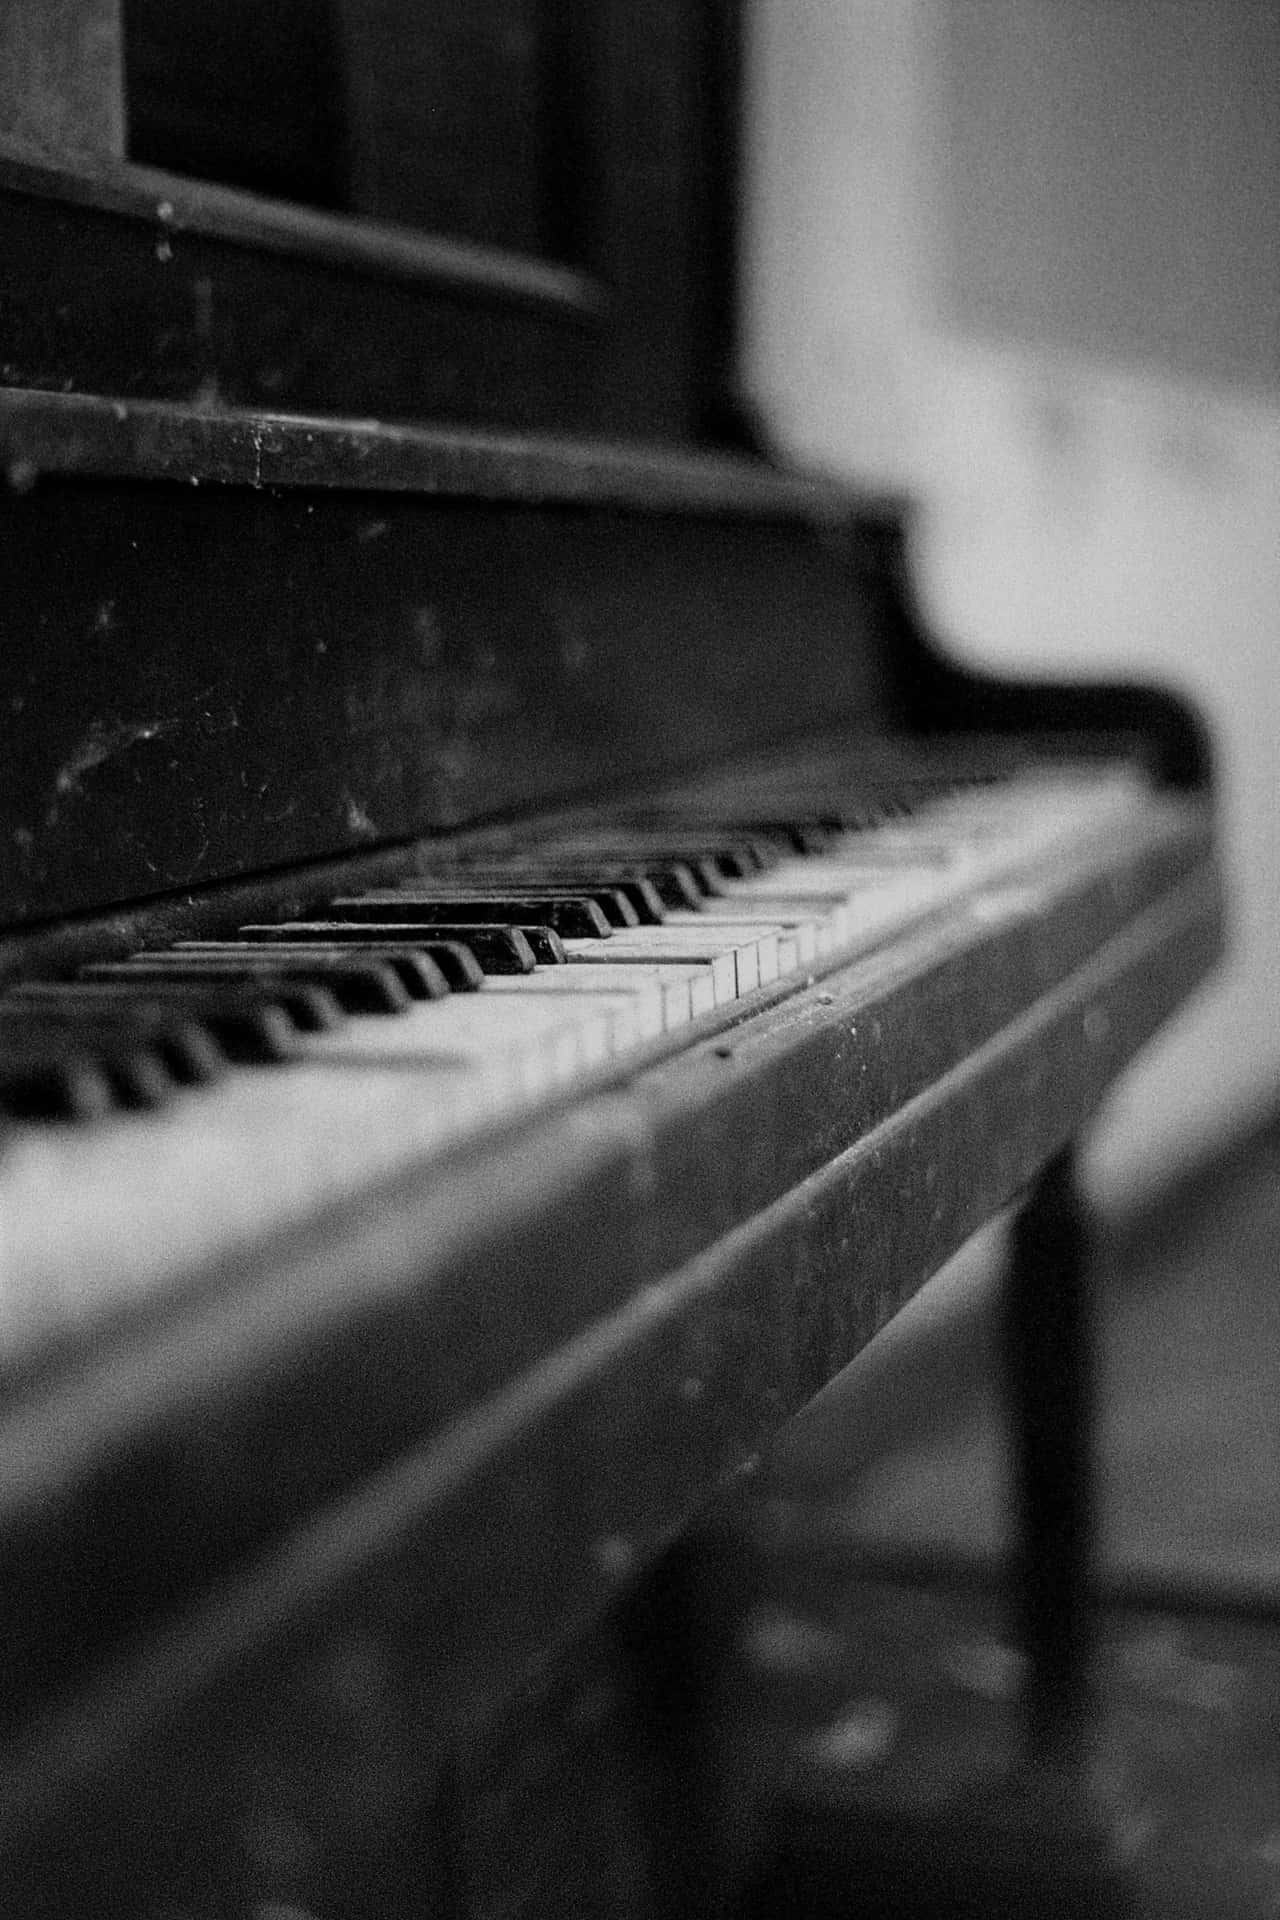 Playing the sweet melodies of a Grand Piano